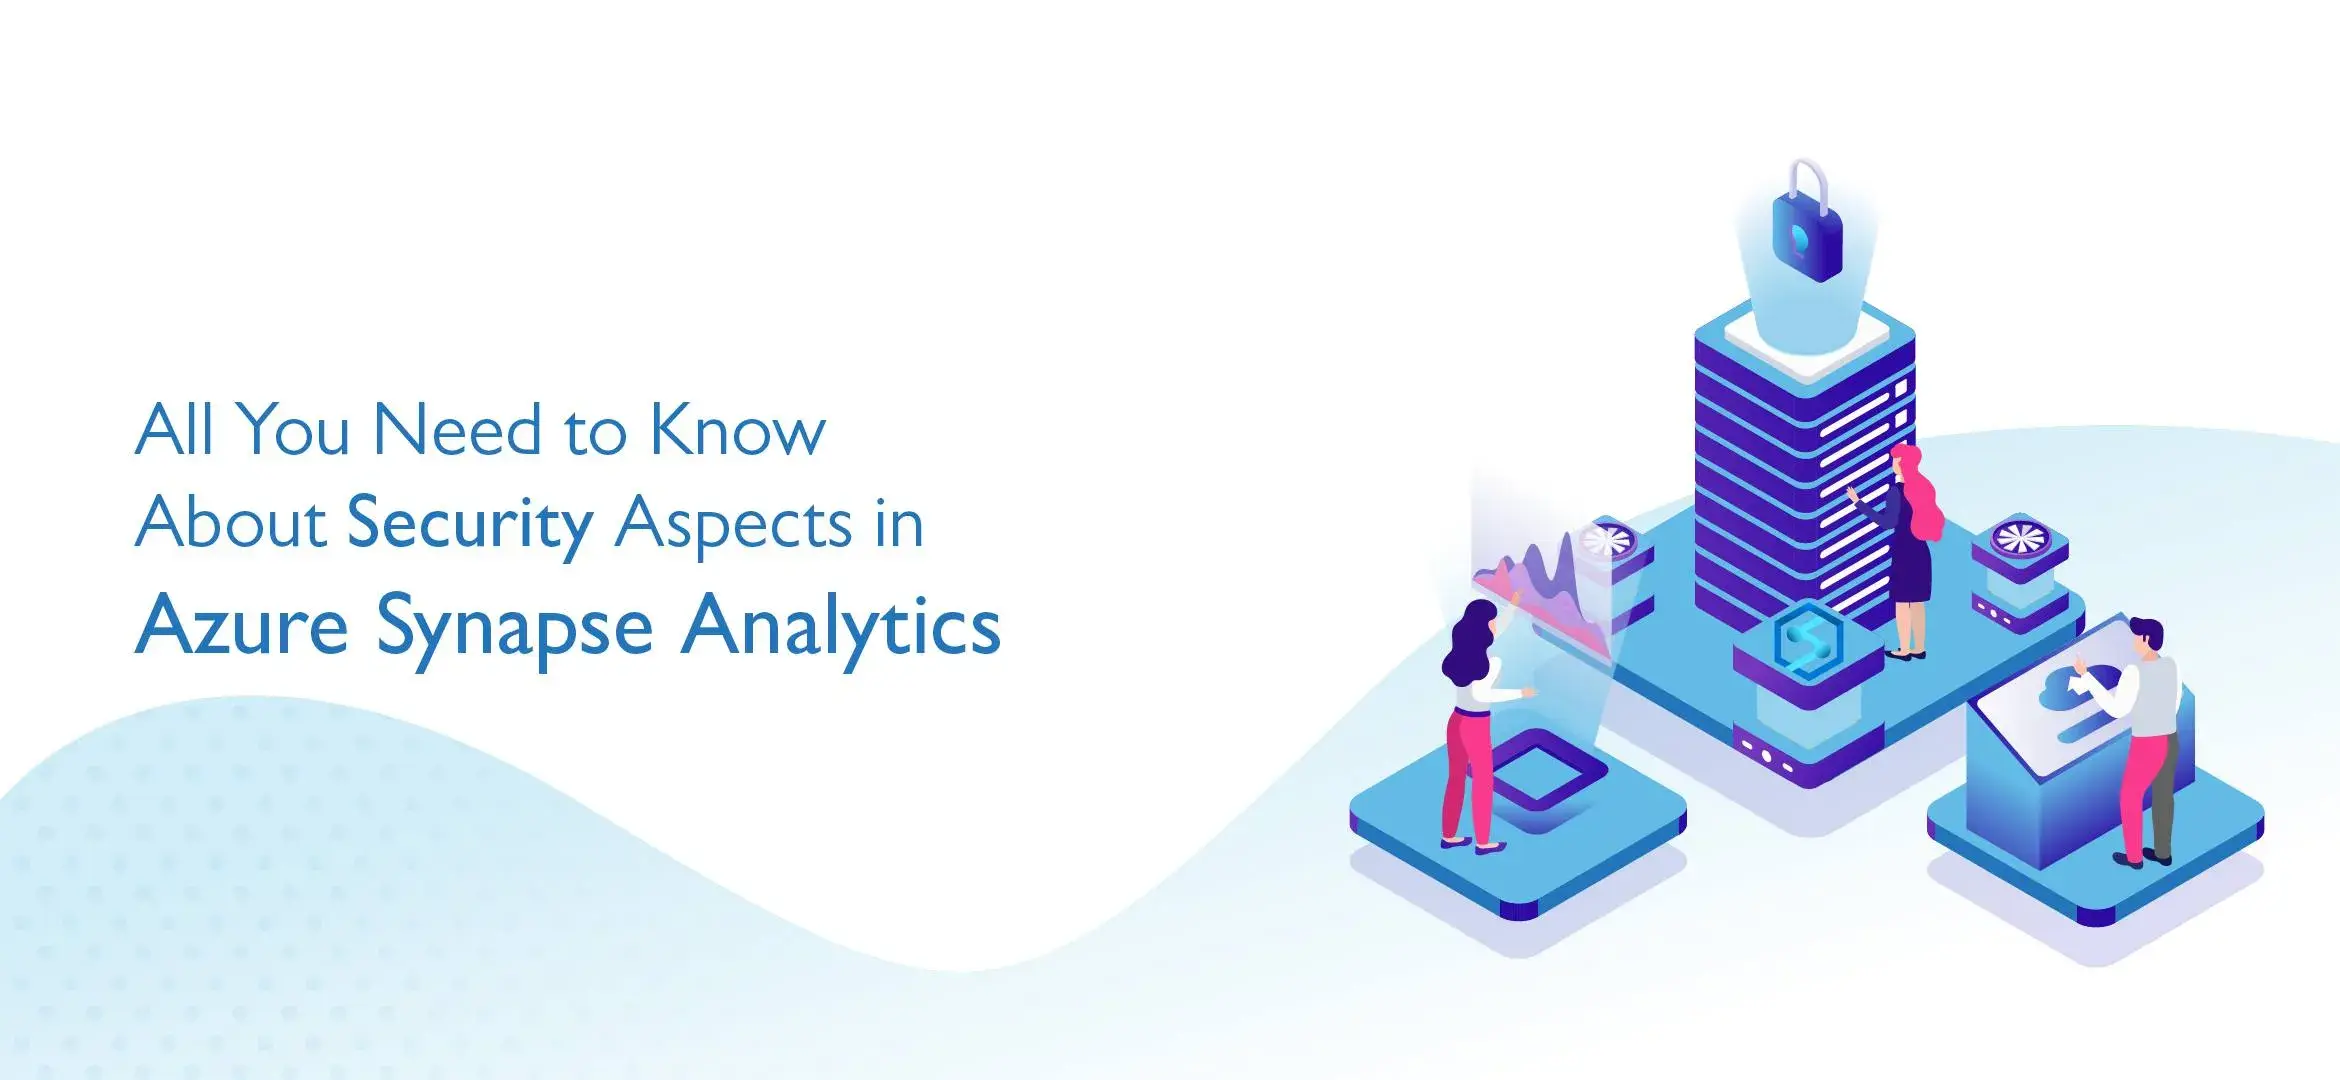 All You Need to Know About Security Aspects in Azure Synapse Analytics